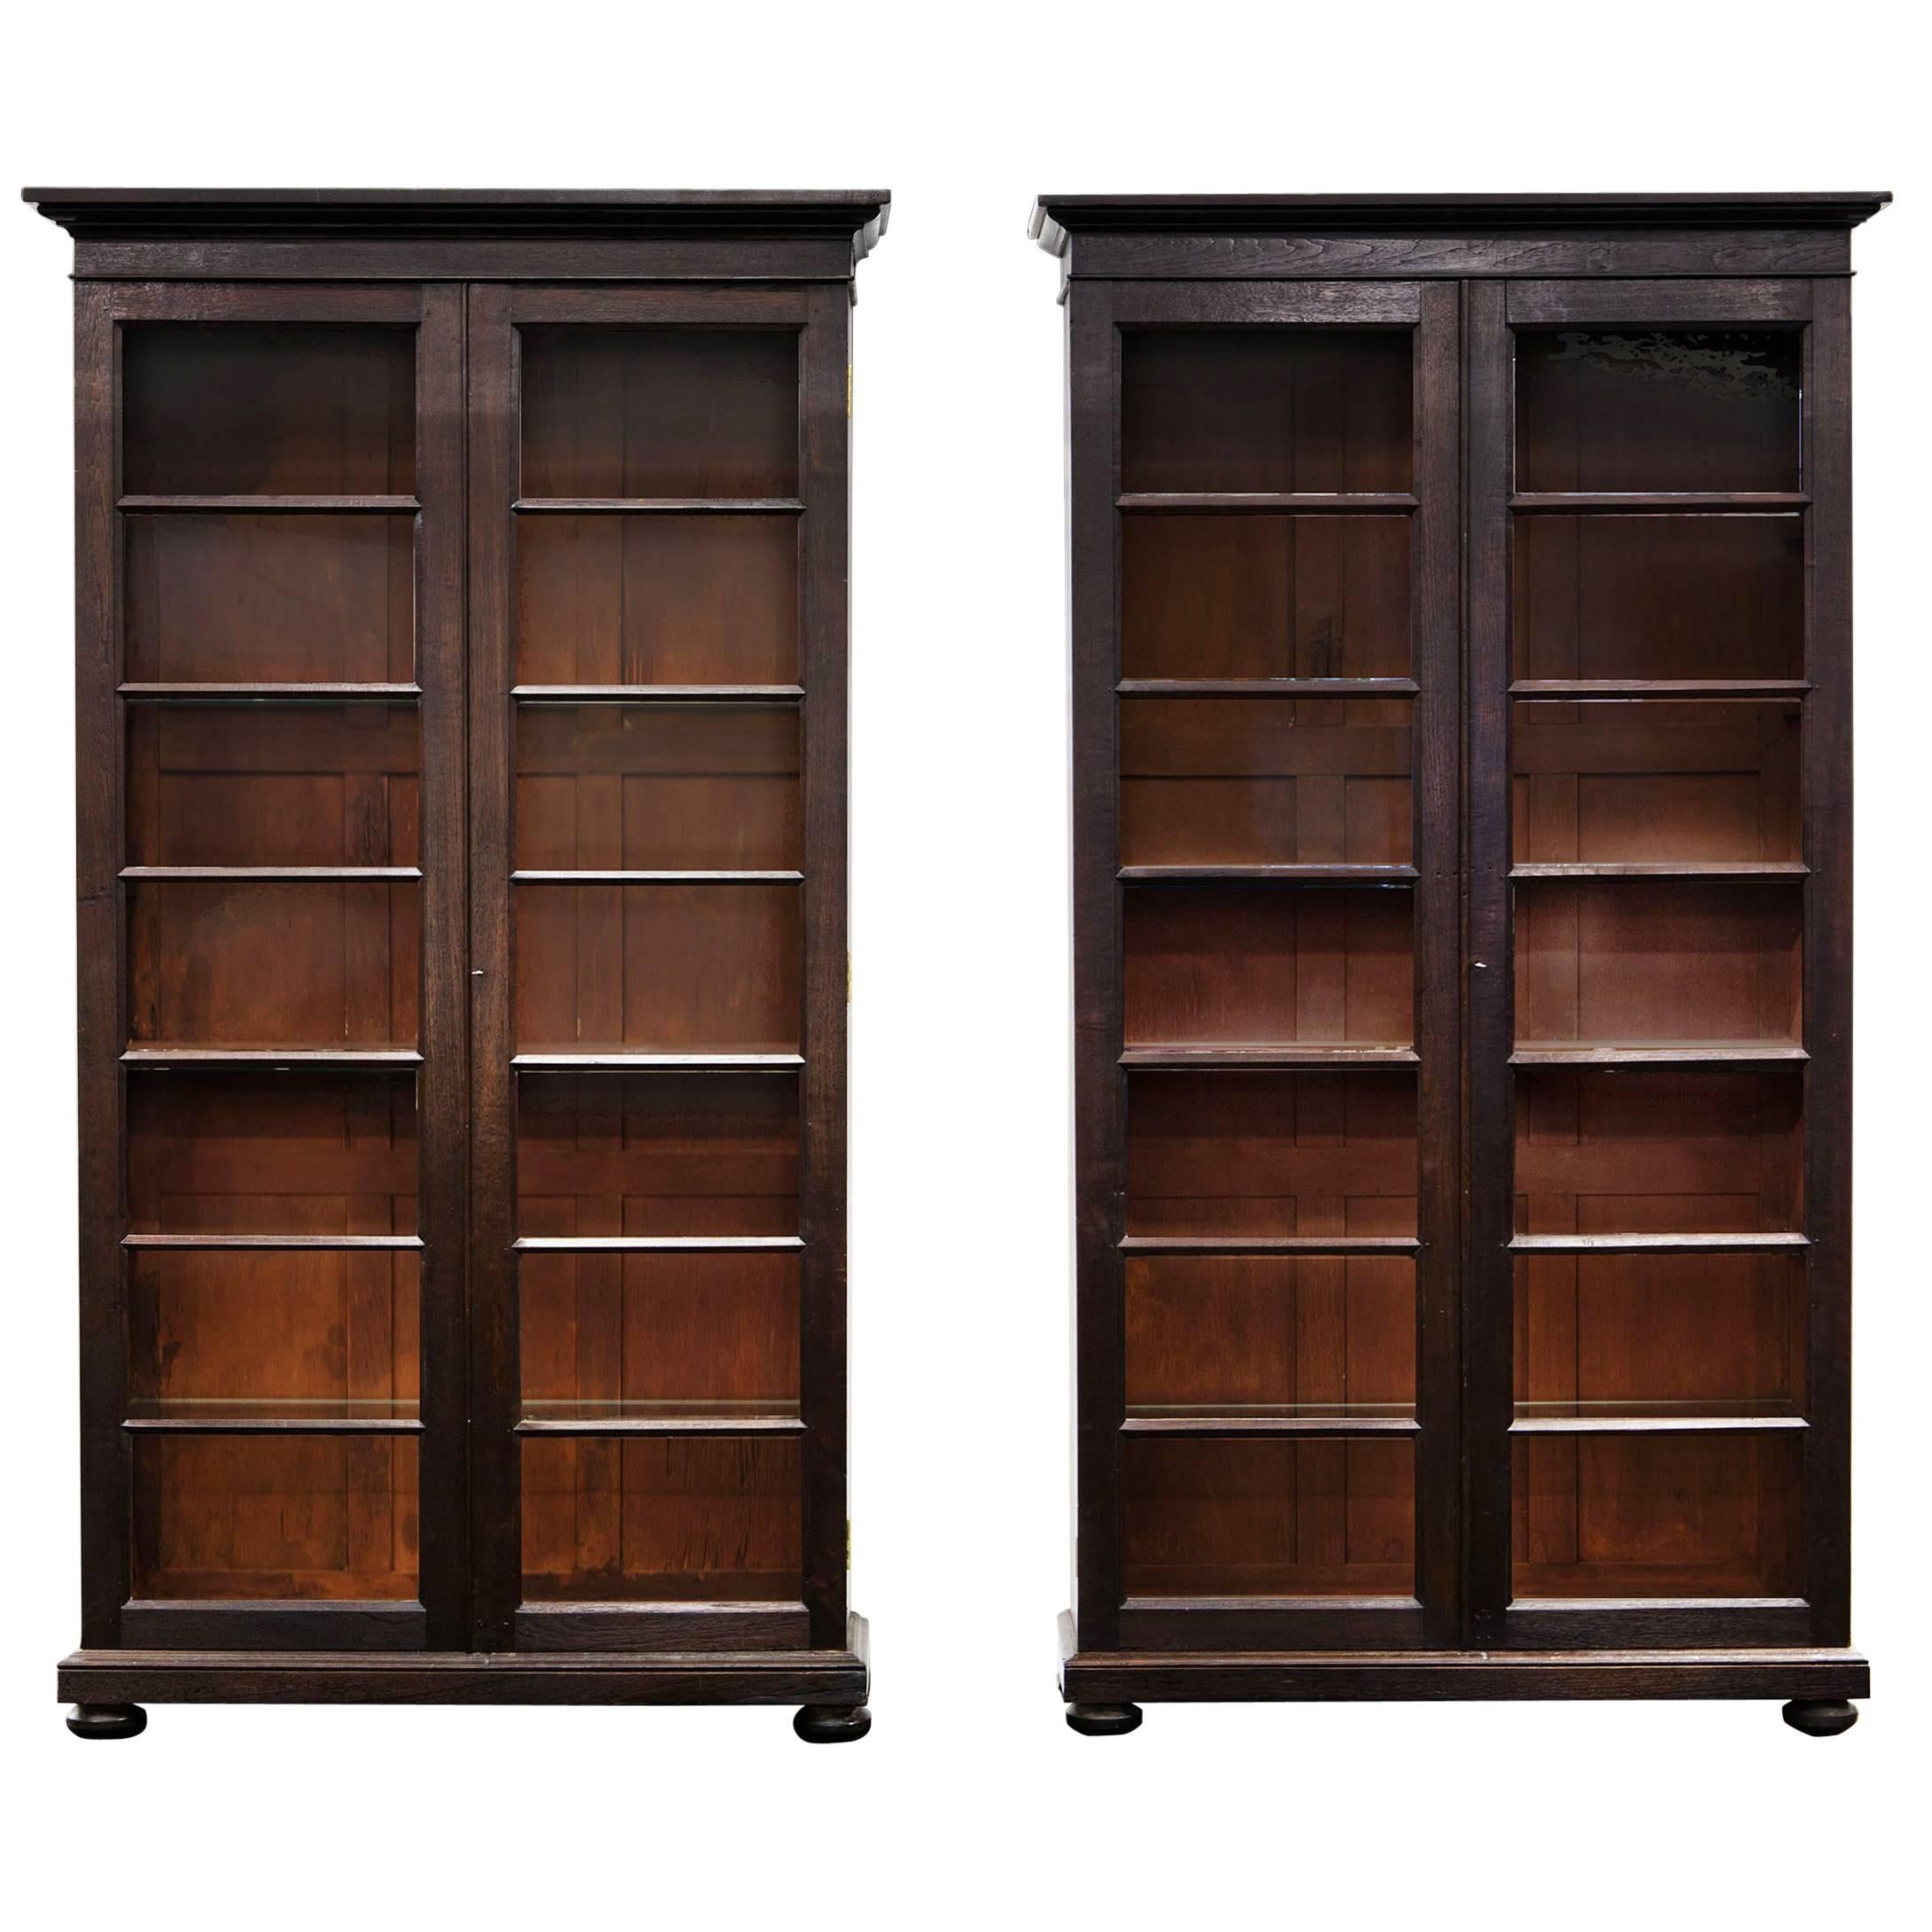 Pair of Anglo-Indian Glazed Display Cabinets or Bookcases